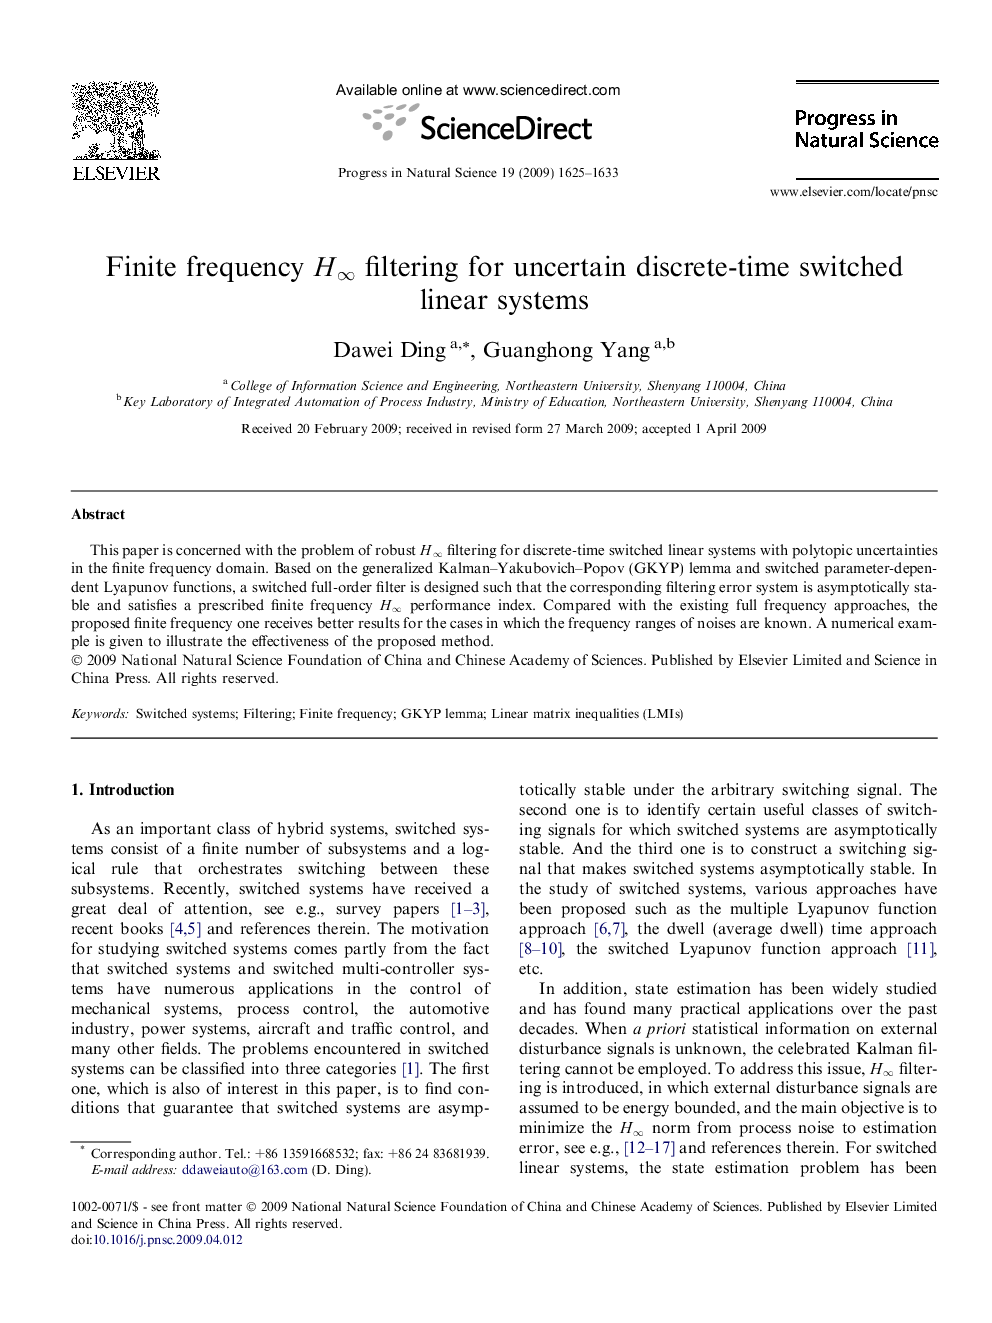 Finite frequency H∞H∞ filtering for uncertain discrete-time switched linear systems